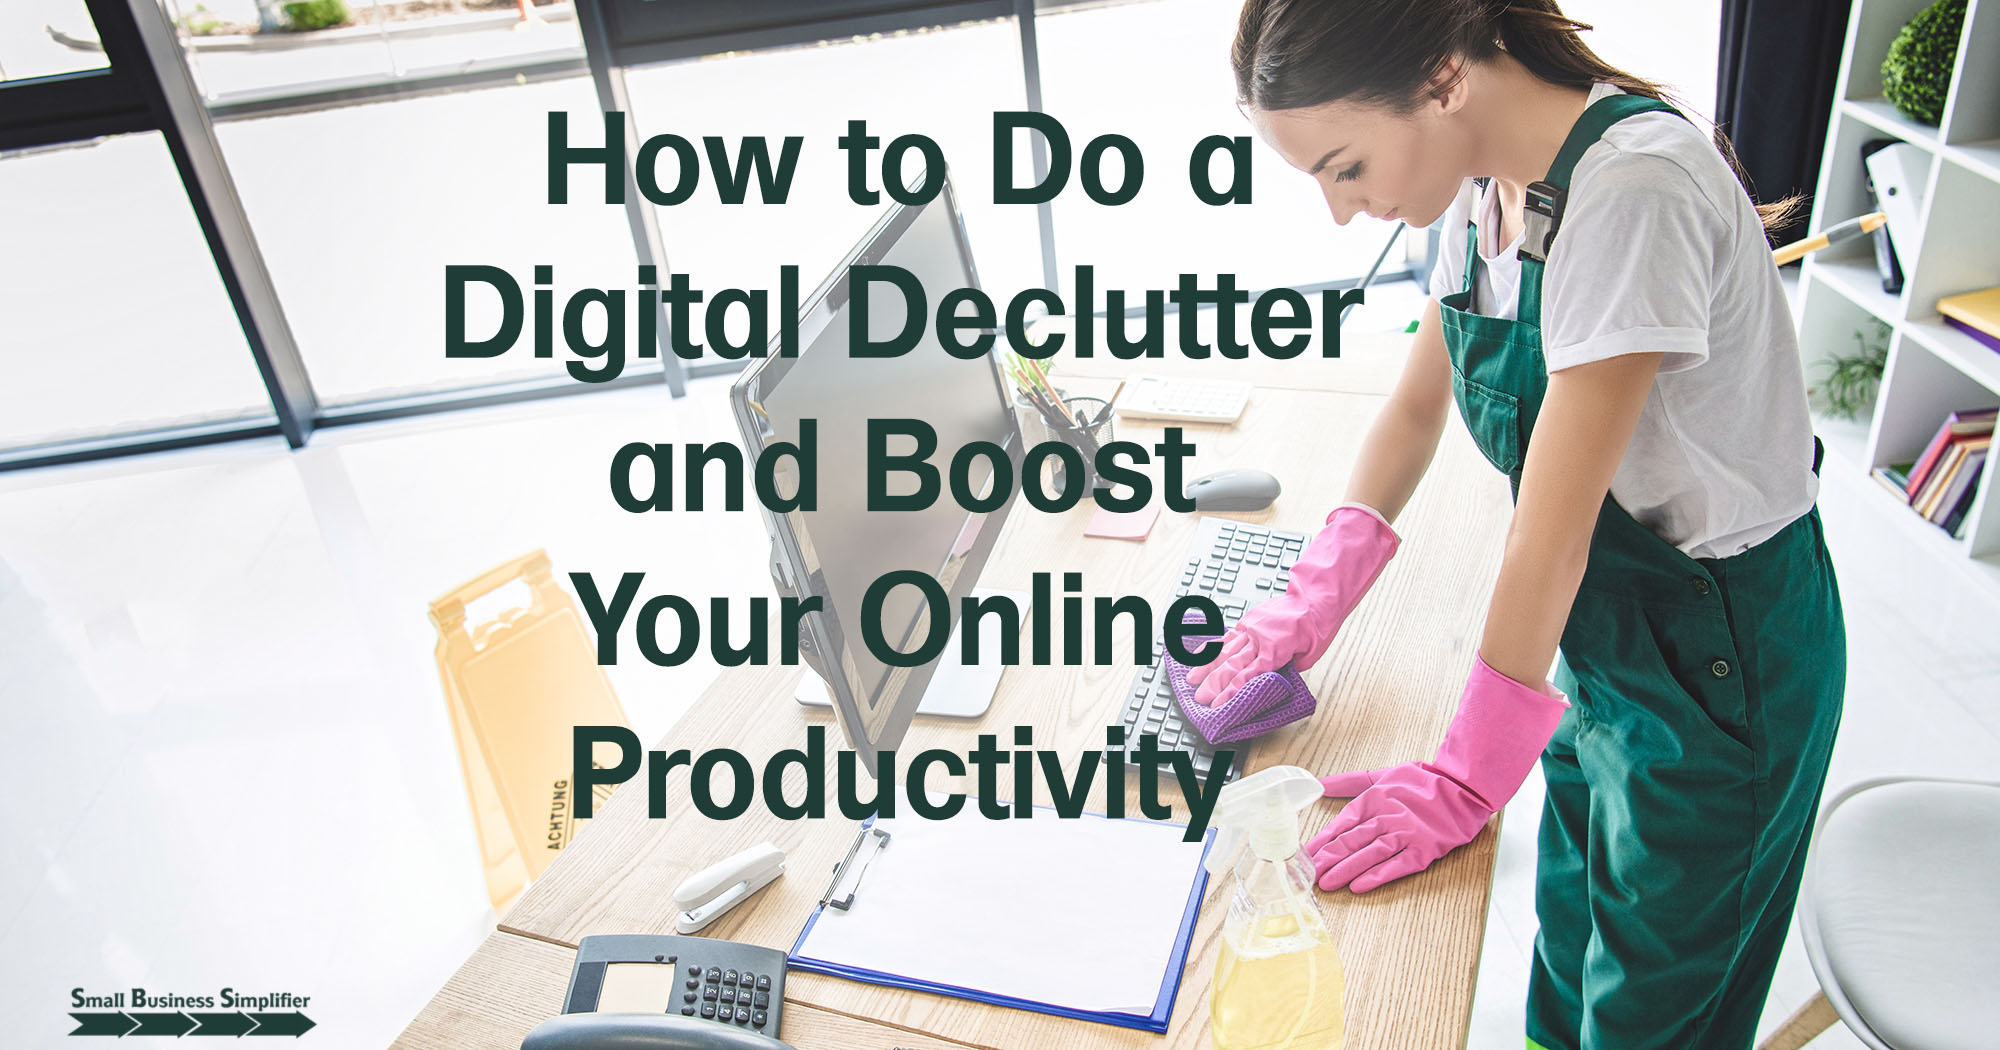 How to Do a Digital Declutter and Boost Your Online Productivity